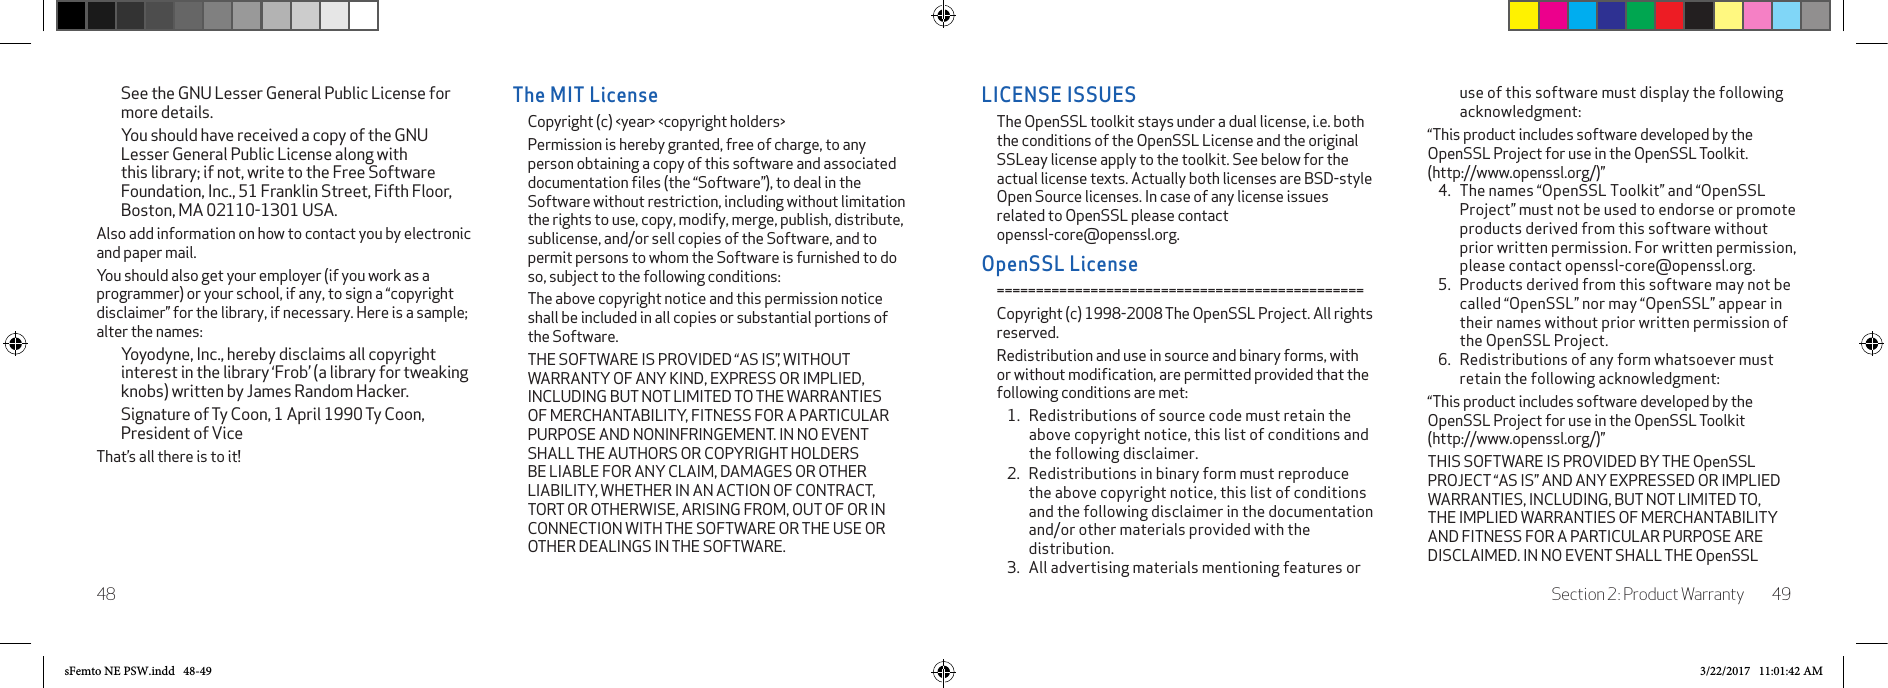 Section 2: Product Warranty 4948LICENSE ISSUESThe OpenSSL toolkit stays under a dual license, i.e. both the conditions of the OpenSSL License and the original SSLeay license apply to the toolkit. See below for the actual license texts. Actually both licenses are BSD-style Open Source licenses. In case of any license issues related to OpenSSL please contact  openssl-core@openssl.org.OpenSSL License===============================================Copyright (c) 1998-2008 The OpenSSL Project. All rights reserved.Redistribution and use in source and binary forms, with or without modiﬁcation, are permitted provided that the following conditions are met:1.   Redistributions of source code must retain the above copyright notice, this list of conditions and the following disclaimer.2.  Redistributions in binary form must reproduce the above copyright notice, this list of conditions and the following disclaimer in the documentation and/or other materials provided with the distribution.3.  All advertising materials mentioning features or use of this software must display the following acknowledgment:“This product includes software developed by the OpenSSL Project for use in the OpenSSL Toolkit.  (http://www.openssl.org/)”4.  The names “OpenSSL Toolkit” and “OpenSSL Project” must not be used to endorse or promote products derived from this software without prior written permission. For written permission, please contact openssl-core@openssl.org.5.  Products derived from this software may not be called “OpenSSL” nor may “OpenSSL” appear in their names without prior written permission of the OpenSSL Project.6.  Redistributions of any form whatsoever must retain the following acknowledgment:“This product includes software developed by the OpenSSL Project for use in the OpenSSL Toolkit  (http://www.openssl.org/)”THIS SOFTWARE IS PROVIDED BY THE OpenSSL PROJECT “AS IS” AND ANY EXPRESSED OR IMPLIED WARRANTIES, INCLUDING, BUT NOT LIMITED TO, THE IMPLIED WARRANTIES OF MERCHANTABILITY AND FITNESS FOR A PARTICULAR PURPOSE ARE DISCLAIMED. IN NO EVENT SHALL THE OpenSSL See the GNU Lesser General Public License for more details.You should have received a copy of the GNU Lesser General Public License along with this library; if not, write to the Free Software Foundation, Inc., 51 Franklin Street, Fifth Floor, Boston, MA 02110-1301 USA.Also add information on how to contact you by electronic and paper mail. You should also get your employer (if you work as a programmer) or your school, if any, to sign a “copyright disclaimer” for the library, if necessary. Here is a sample; alter the names: Yoyodyne, Inc., hereby disclaims all copyright interest in the library ‘Frob’ (a library for tweaking knobs) written by James Random Hacker.Signature of Ty Coon, 1 April 1990 Ty Coon, President of ViceThat’s all there is to it!The MIT LicenseCopyright (c) &lt;year&gt; &lt;copyright holders&gt;Permission is hereby granted, free of charge, to any person obtaining a copy of this software and associated documentation ﬁles (the “Software”), to deal in the Software without restriction, including without limitation the rights to use, copy, modify, merge, publish, distribute, sublicense, and/or sell copies of the Software, and to permit persons to whom the Software is furnished to do so, subject to the following conditions:The above copyright notice and this permission notice shall be included in all copies or substantial portions of the Software.THE SOFTWARE IS PROVIDED “AS IS”, WITHOUT WARRANTY OF ANY KIND, EXPRESS OR IMPLIED, INCLUDING BUT NOT LIMITED TO THE WARRANTIES OF MERCHANTABILITY, FITNESS FOR A PARTICULAR PURPOSE AND NONINFRINGEMENT. IN NO EVENT SHALL THE AUTHORS OR COPYRIGHT HOLDERS BE LIABLE FOR ANY CLAIM, DAMAGES OR OTHER LIABILITY, WHETHER IN AN ACTION OF CONTRACT, TORT OR OTHERWISE, ARISING FROM, OUT OF OR IN CONNECTION WITH THE SOFTWARE OR THE USE OR OTHER DEALINGS IN THE SOFTWARE.sFemto NE PSW.indd   48-49 3/22/2017   11:01:42 AM